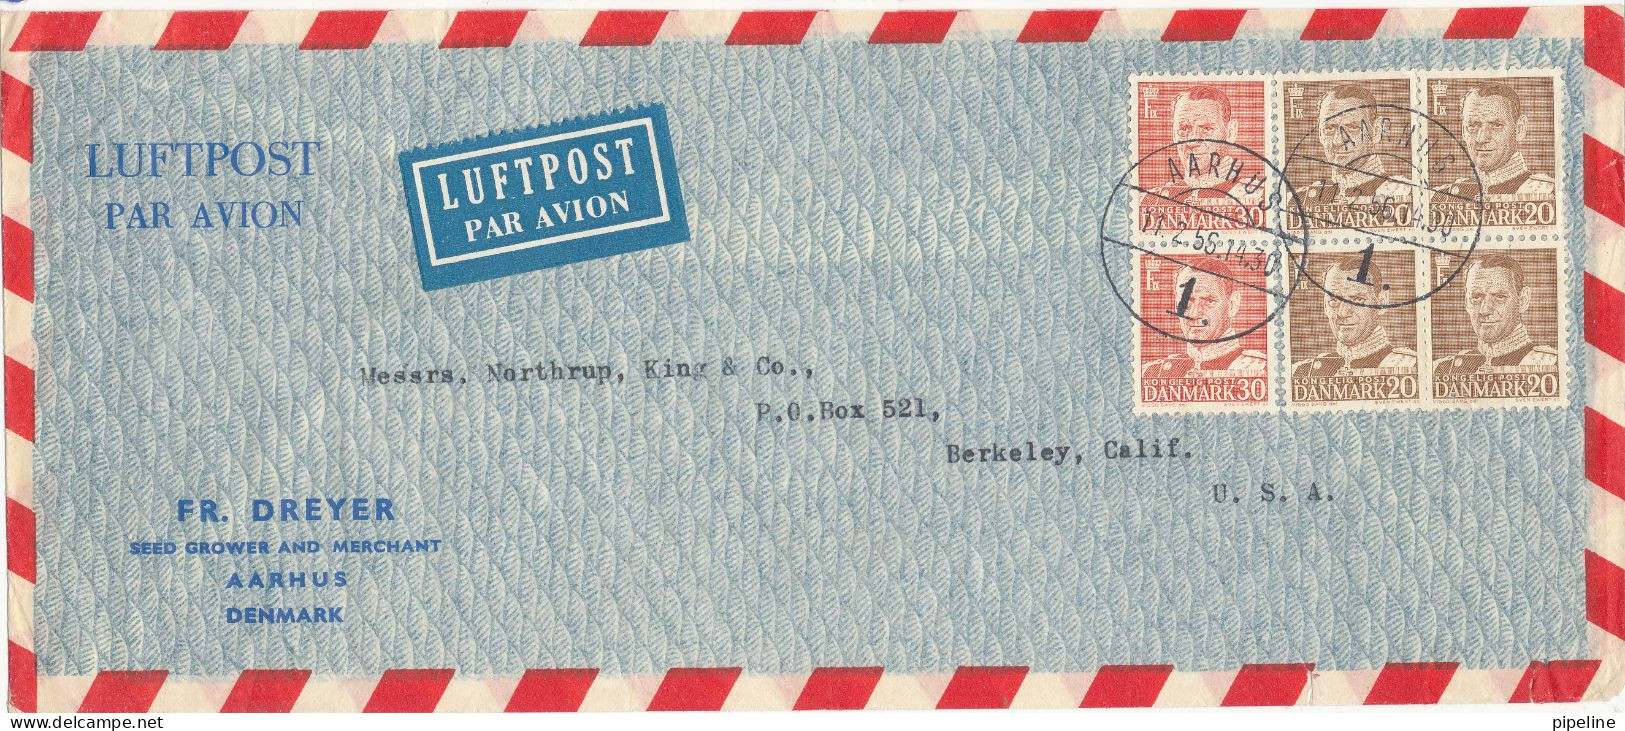 Denmark Air Mail Cover Sent To USA Aarhus 11-2-1956 Fr. Dreyer Seed Grower And Merchant - Airmail